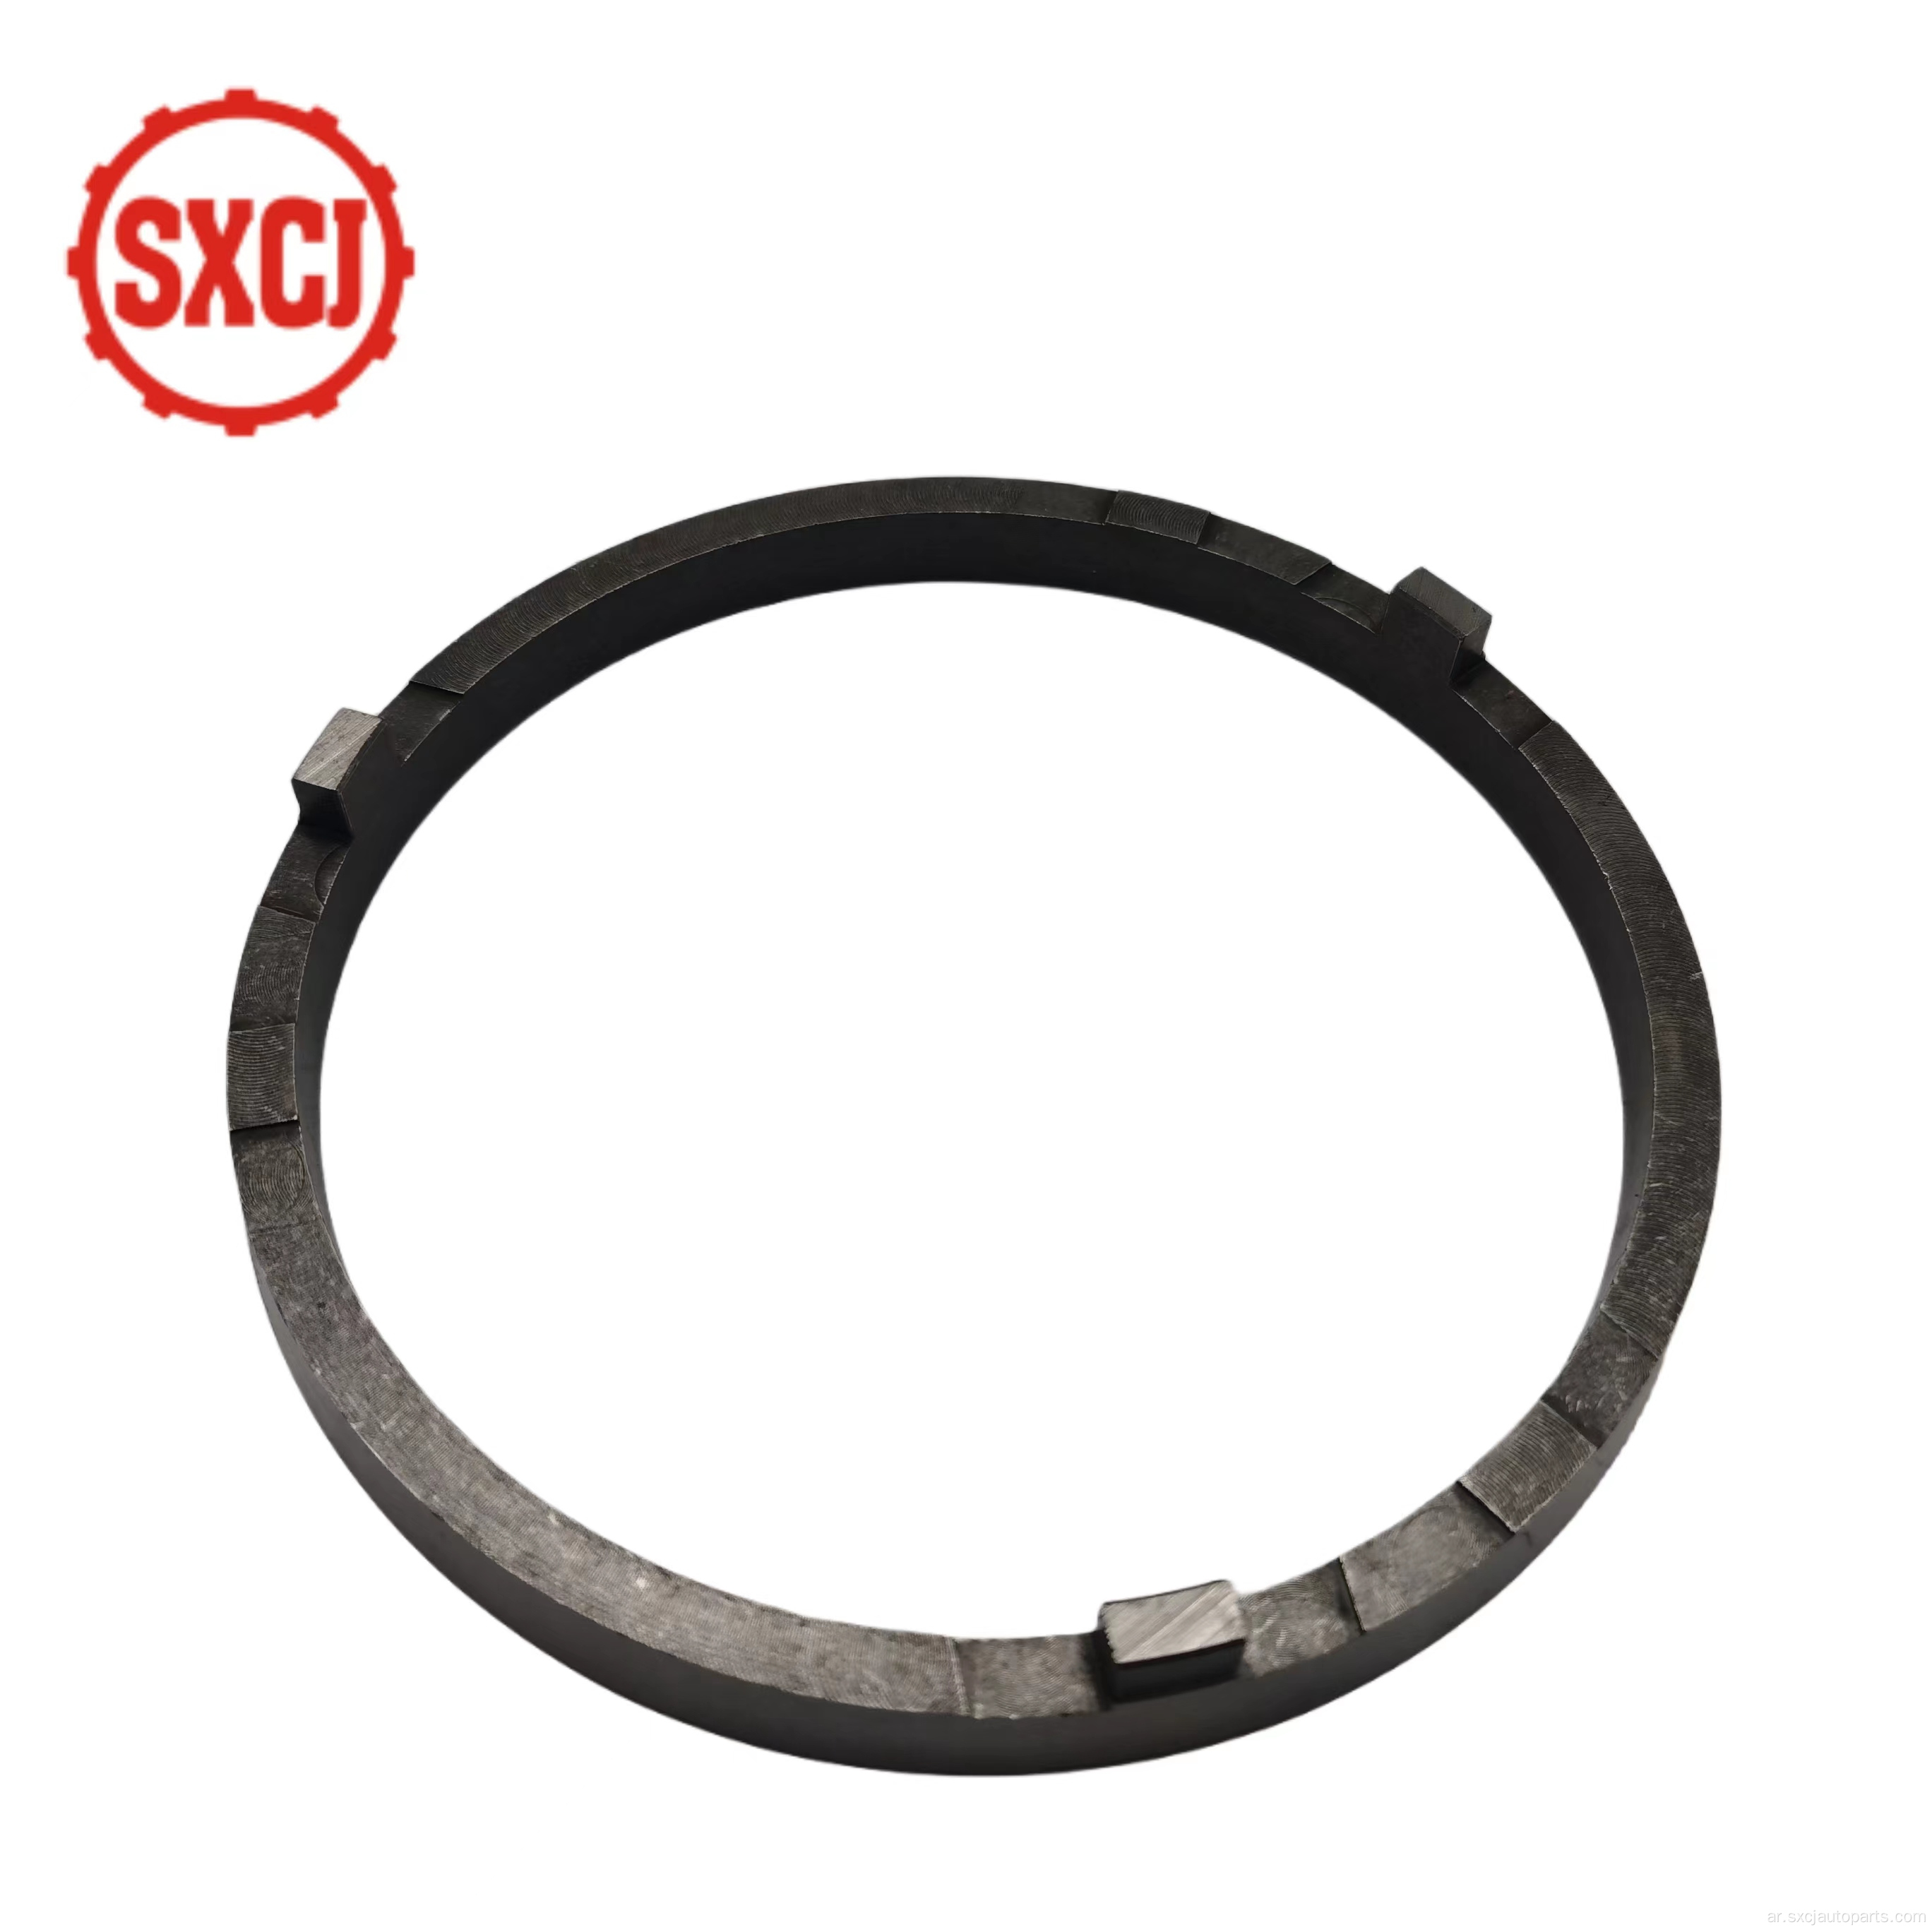 OEM970 262 1937 Manical Syto Parts Transmission Ring For Benz ZF